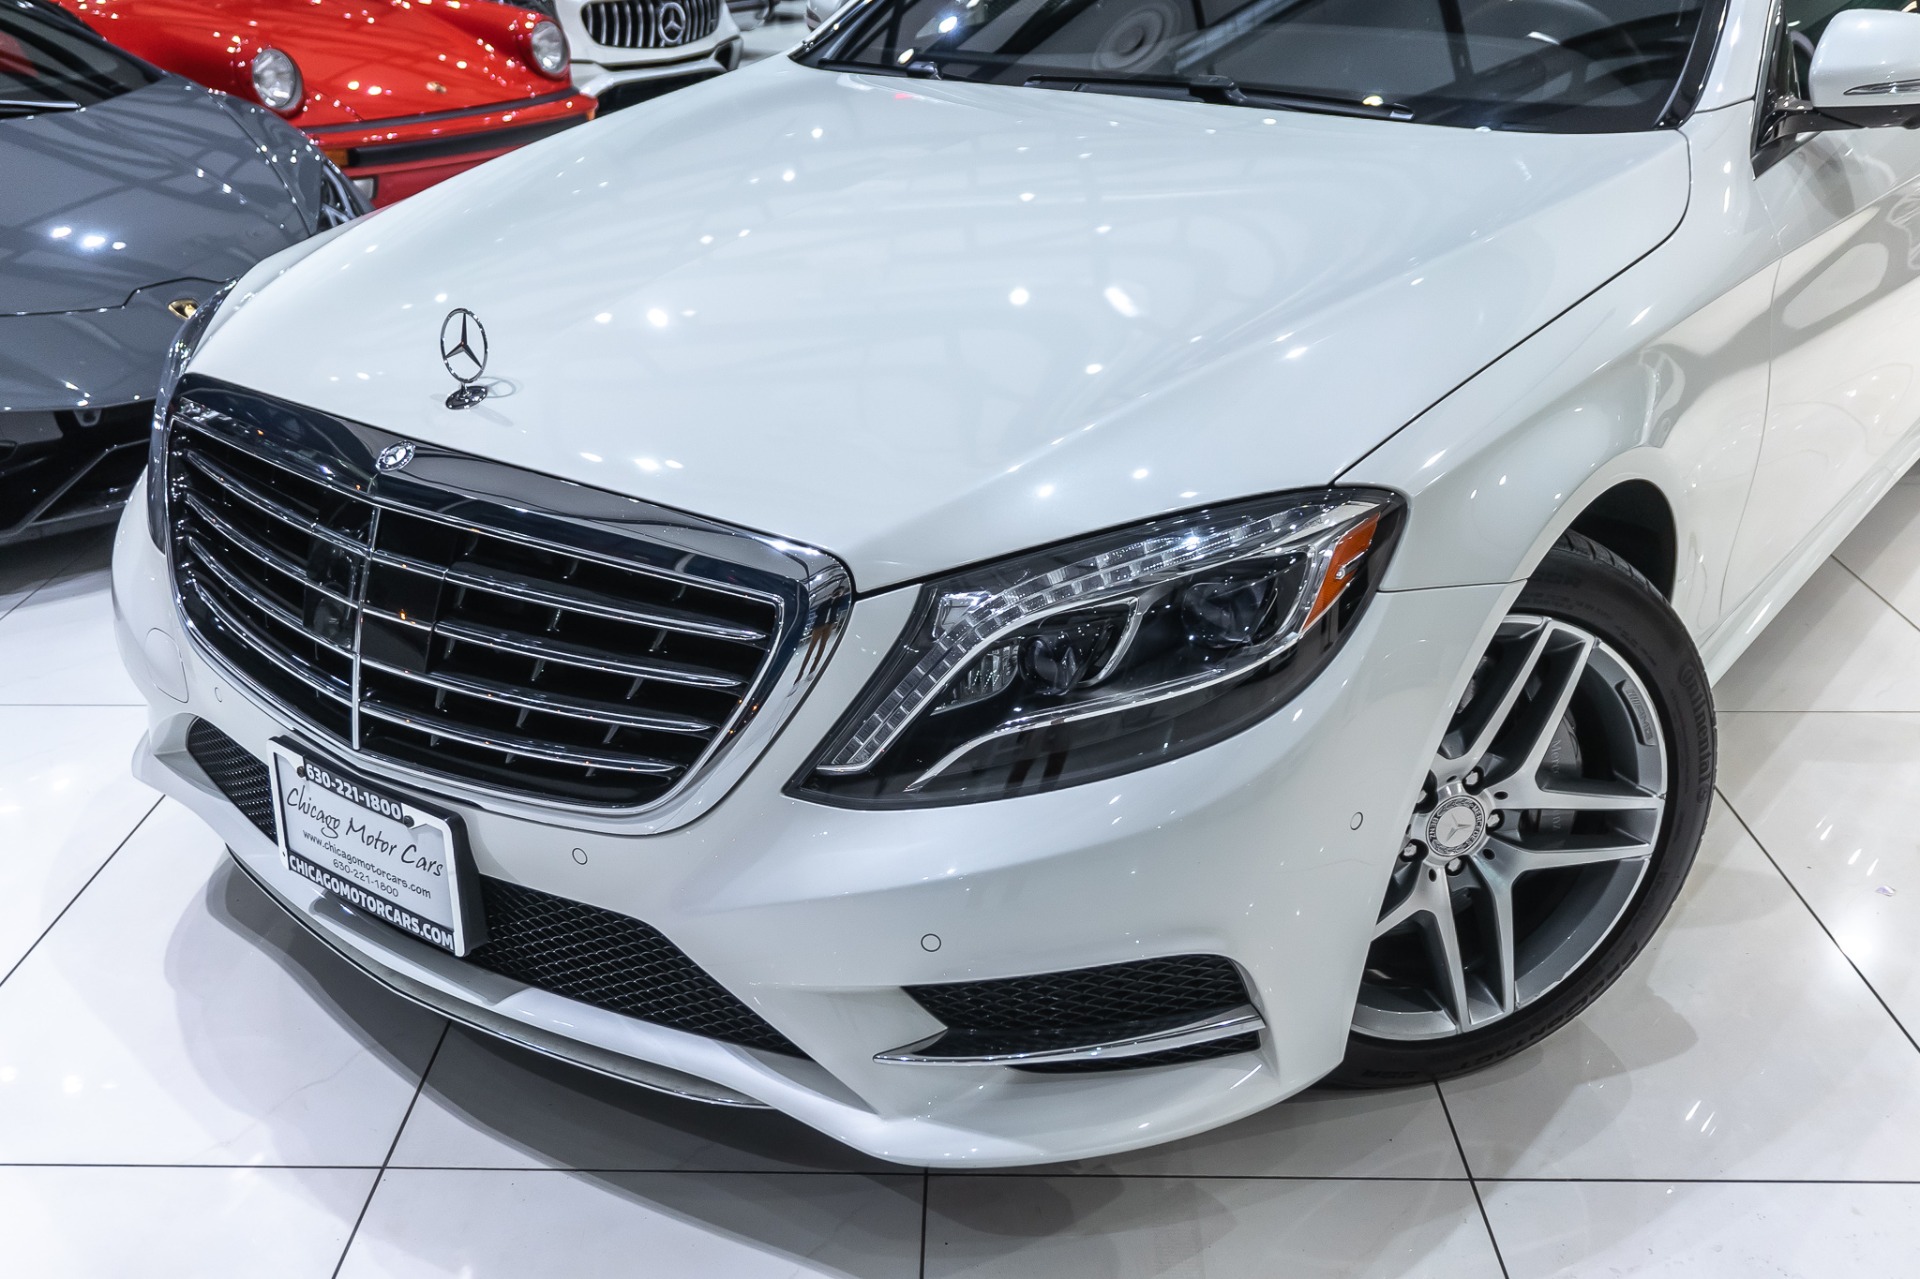 Used-2015-Mercedes-Benz-S550-4-Matic-Sedan-SPORT-PACKAGE-Only-26k-Miles